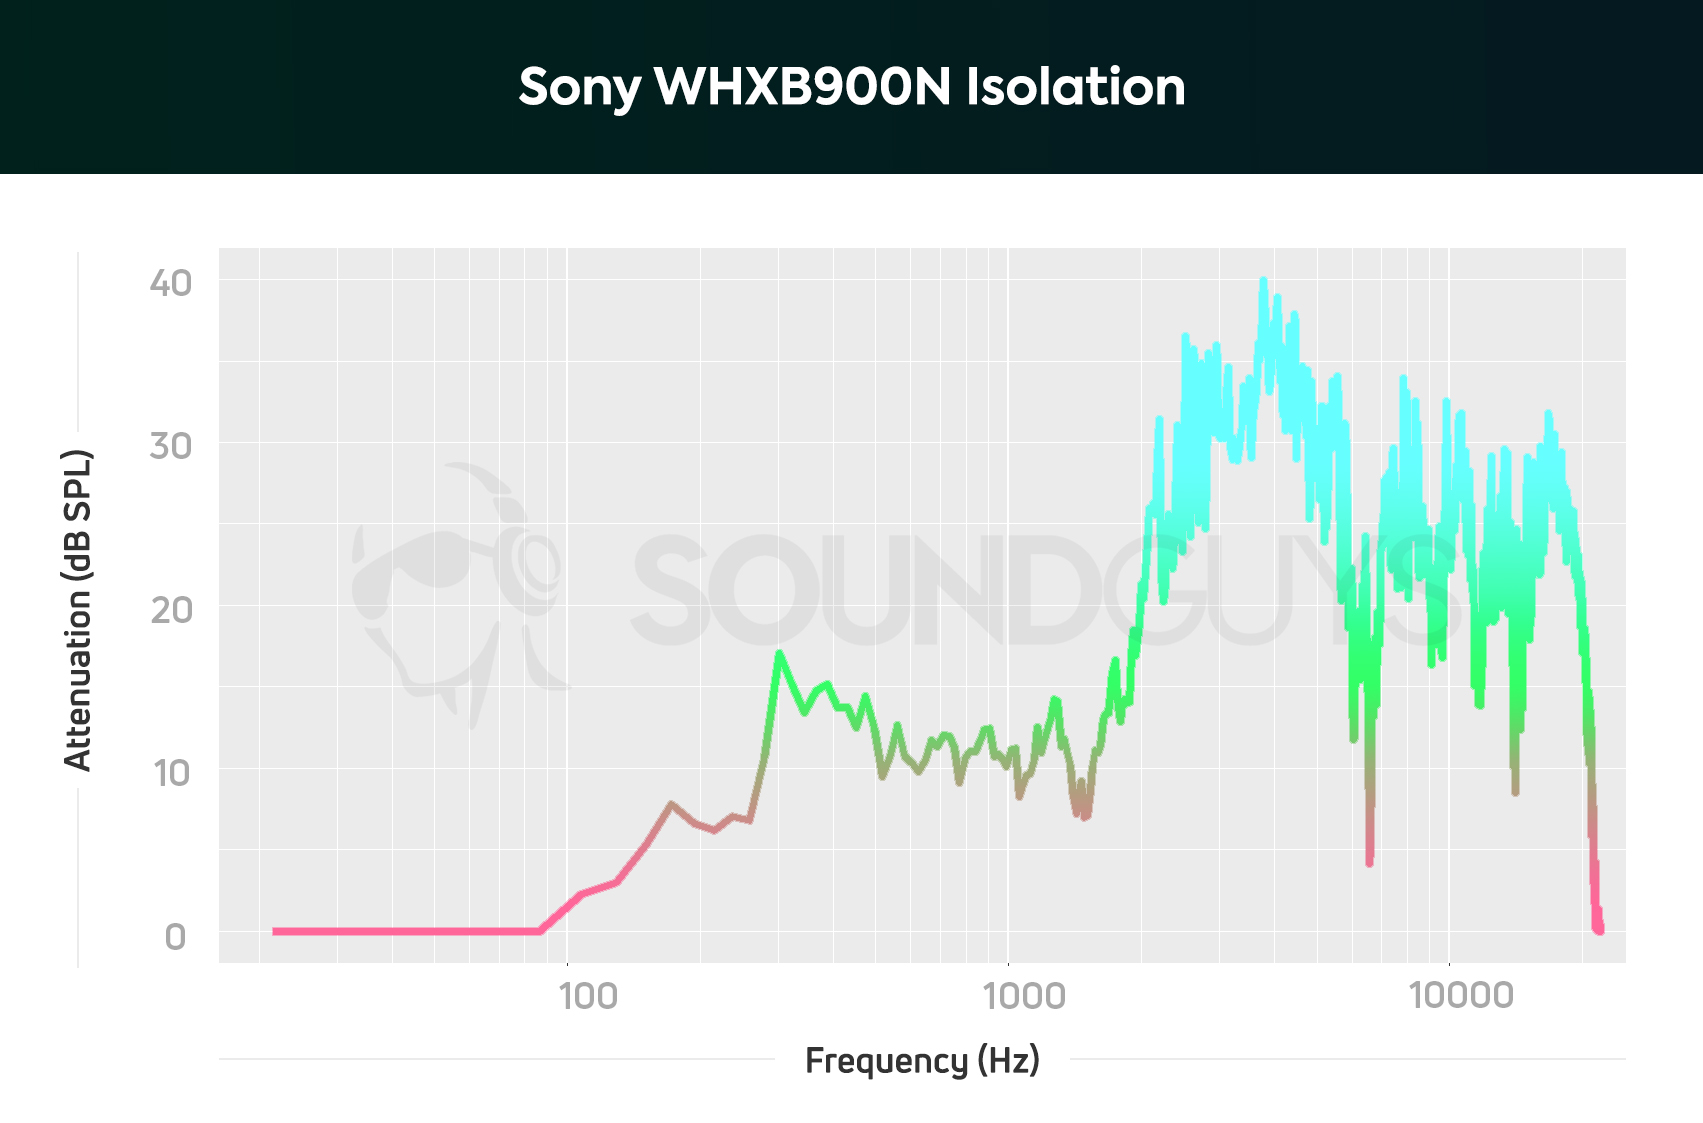 The Sony WH-XB900N isolation graph shows the effectiveness of the active noise cancelling.